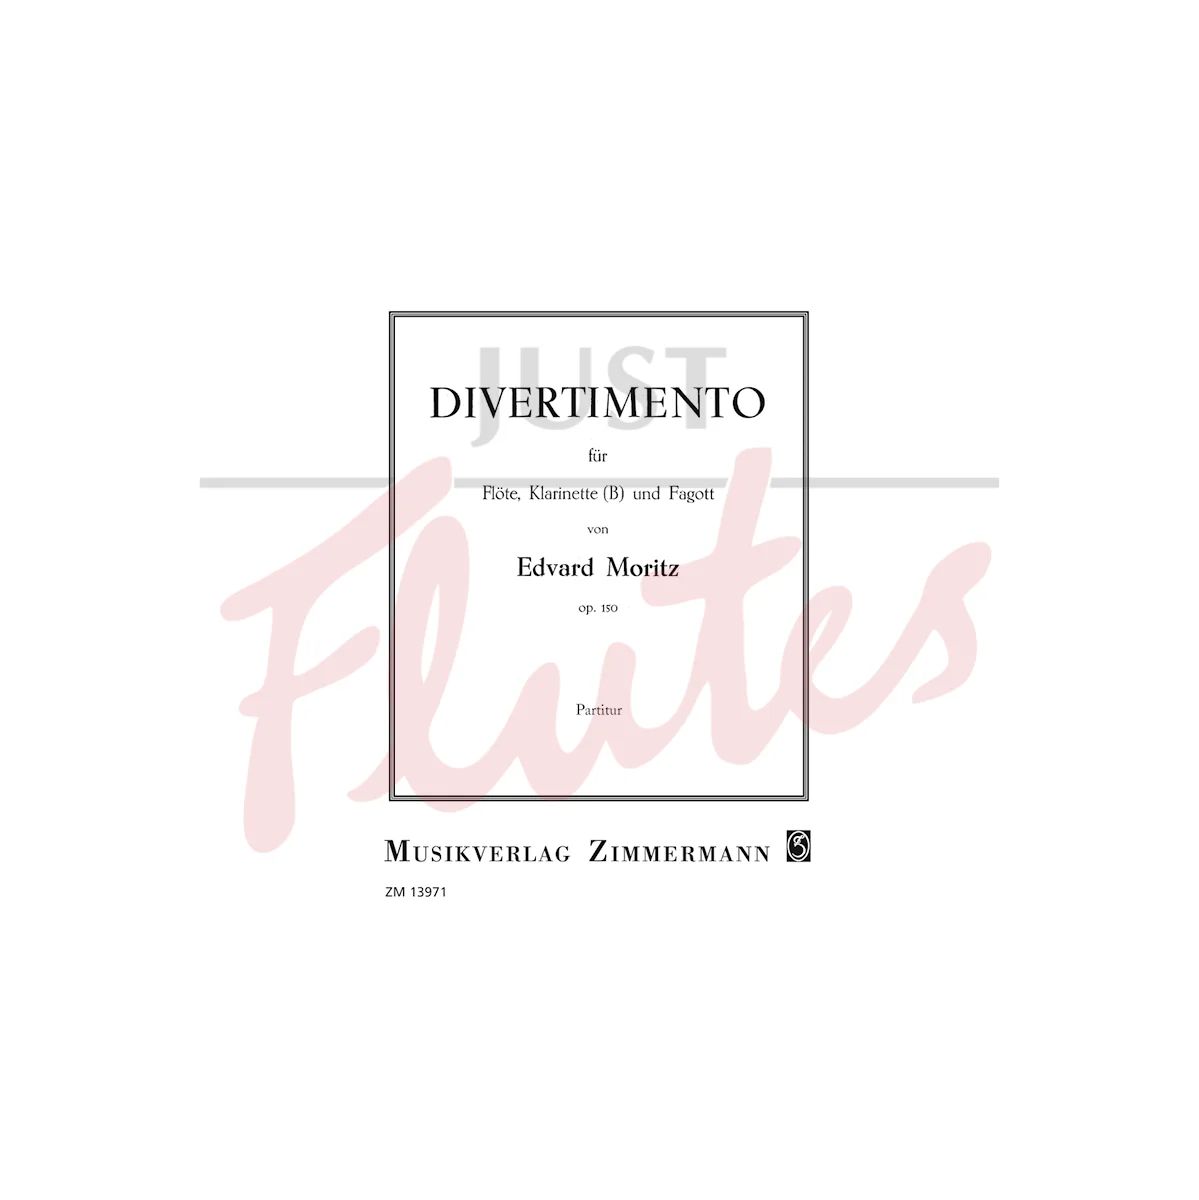 Divertimento for Flute, Clarinet and Bassoon